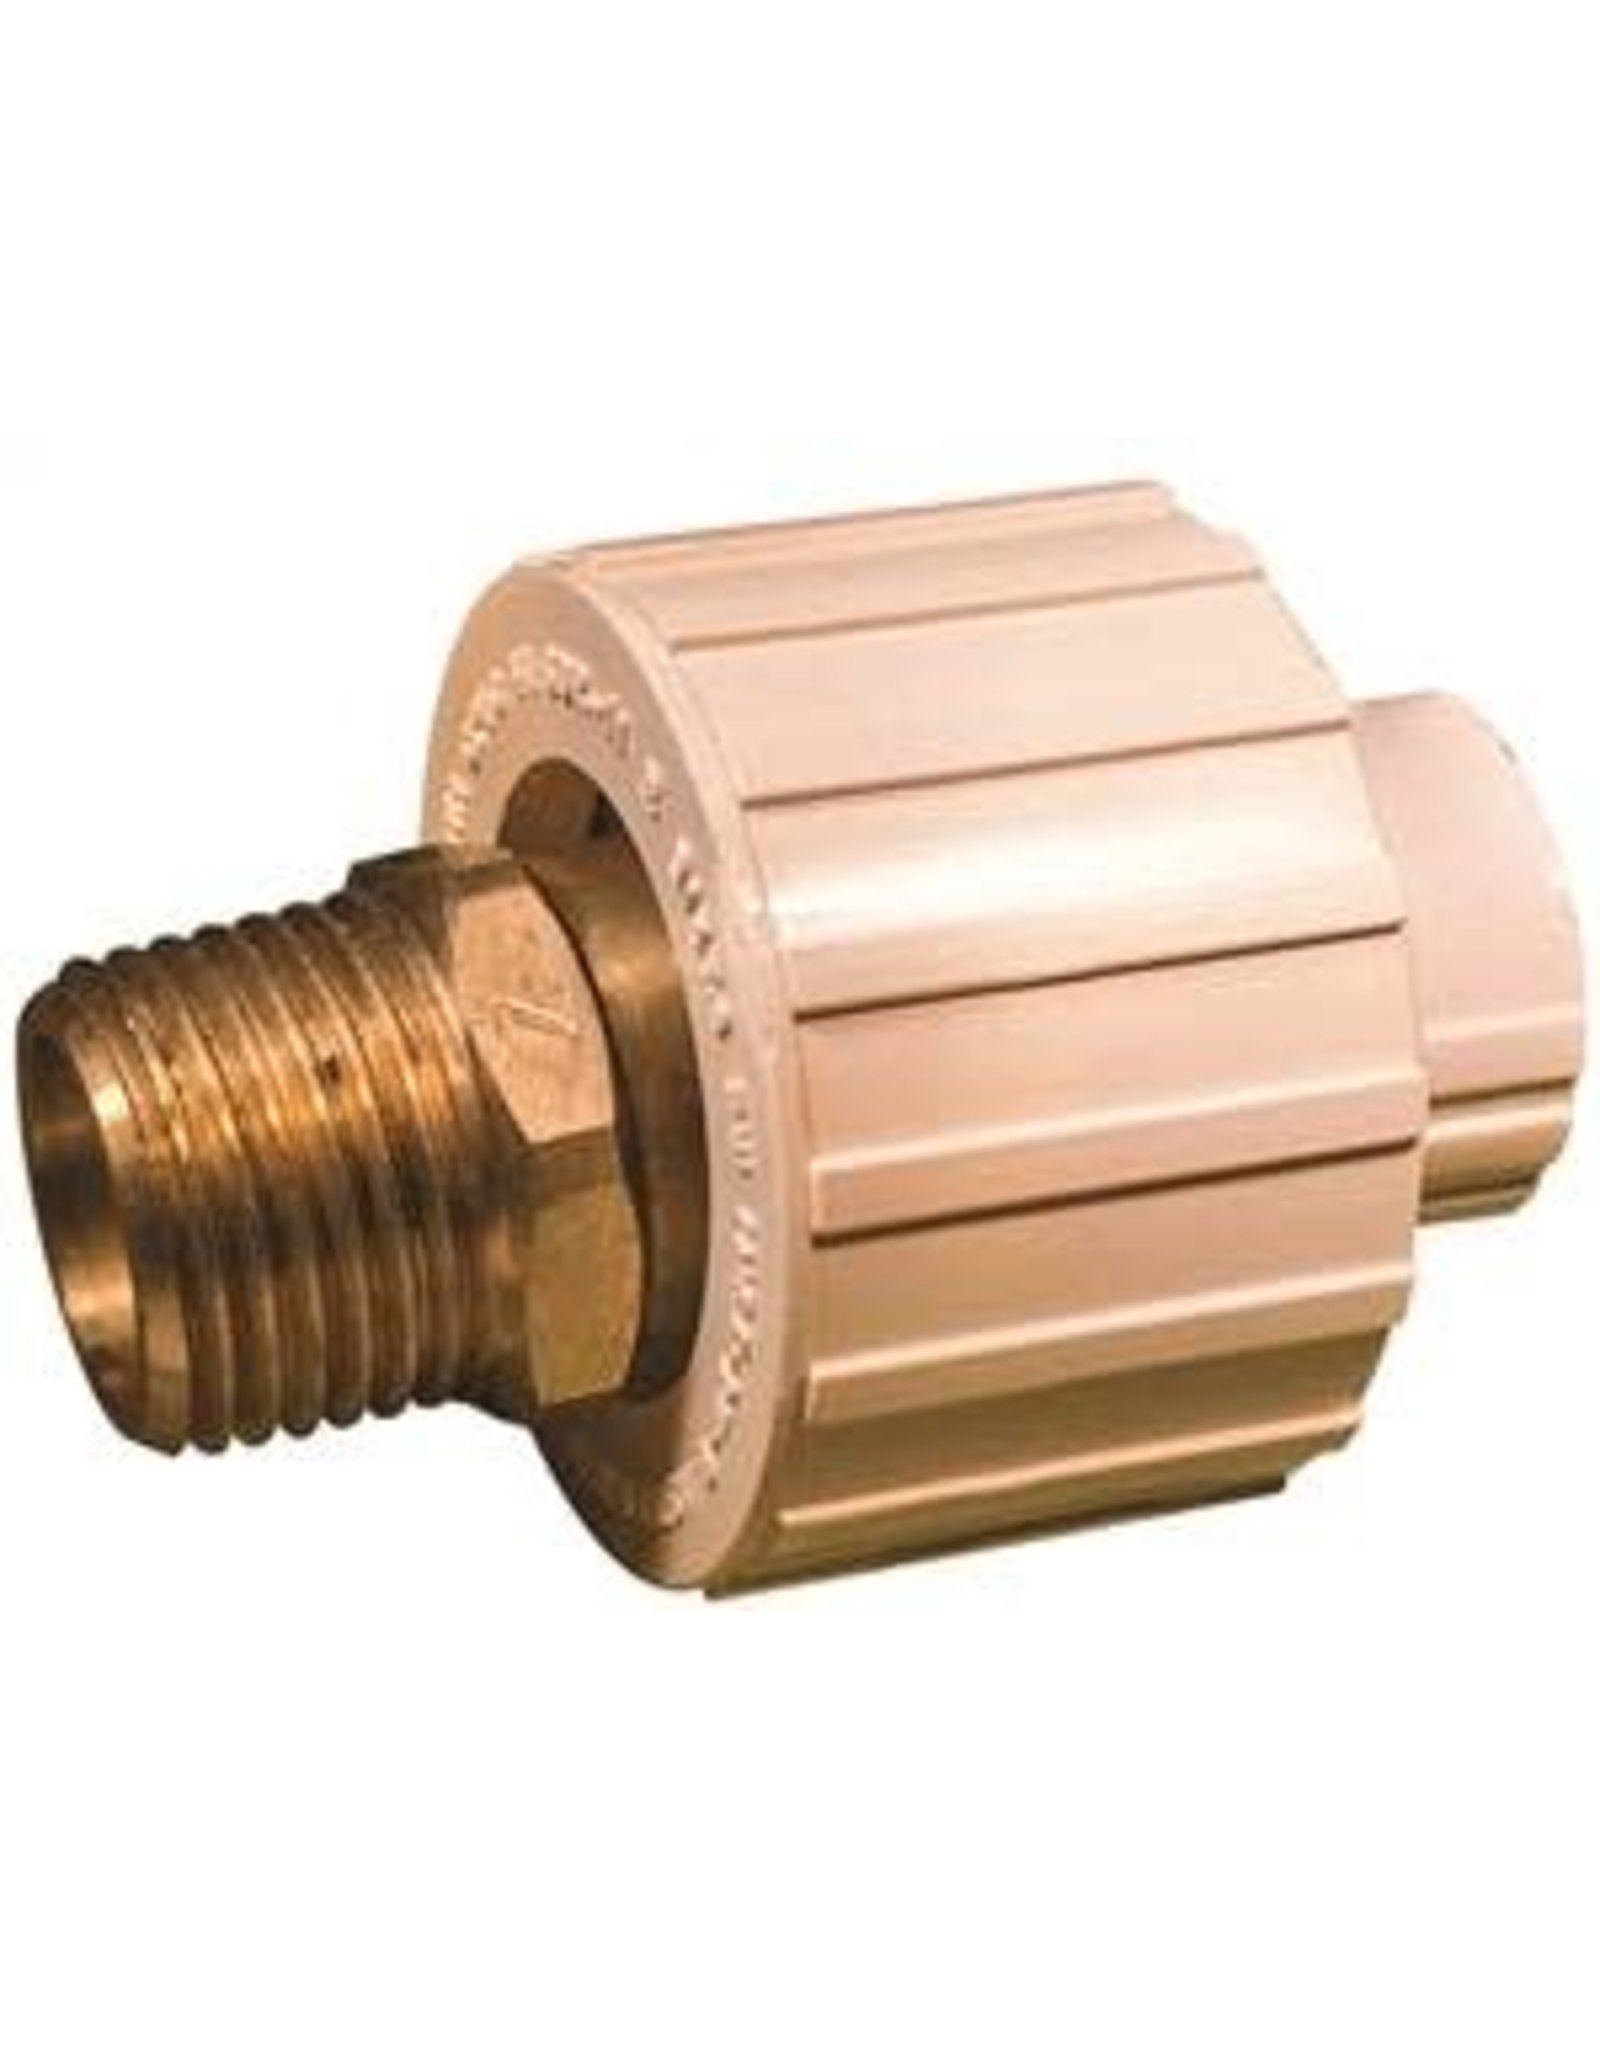 Nibco NIBCO T00320D Transition Union, 1/2 in, Slip x MIP, Brass/CPVC